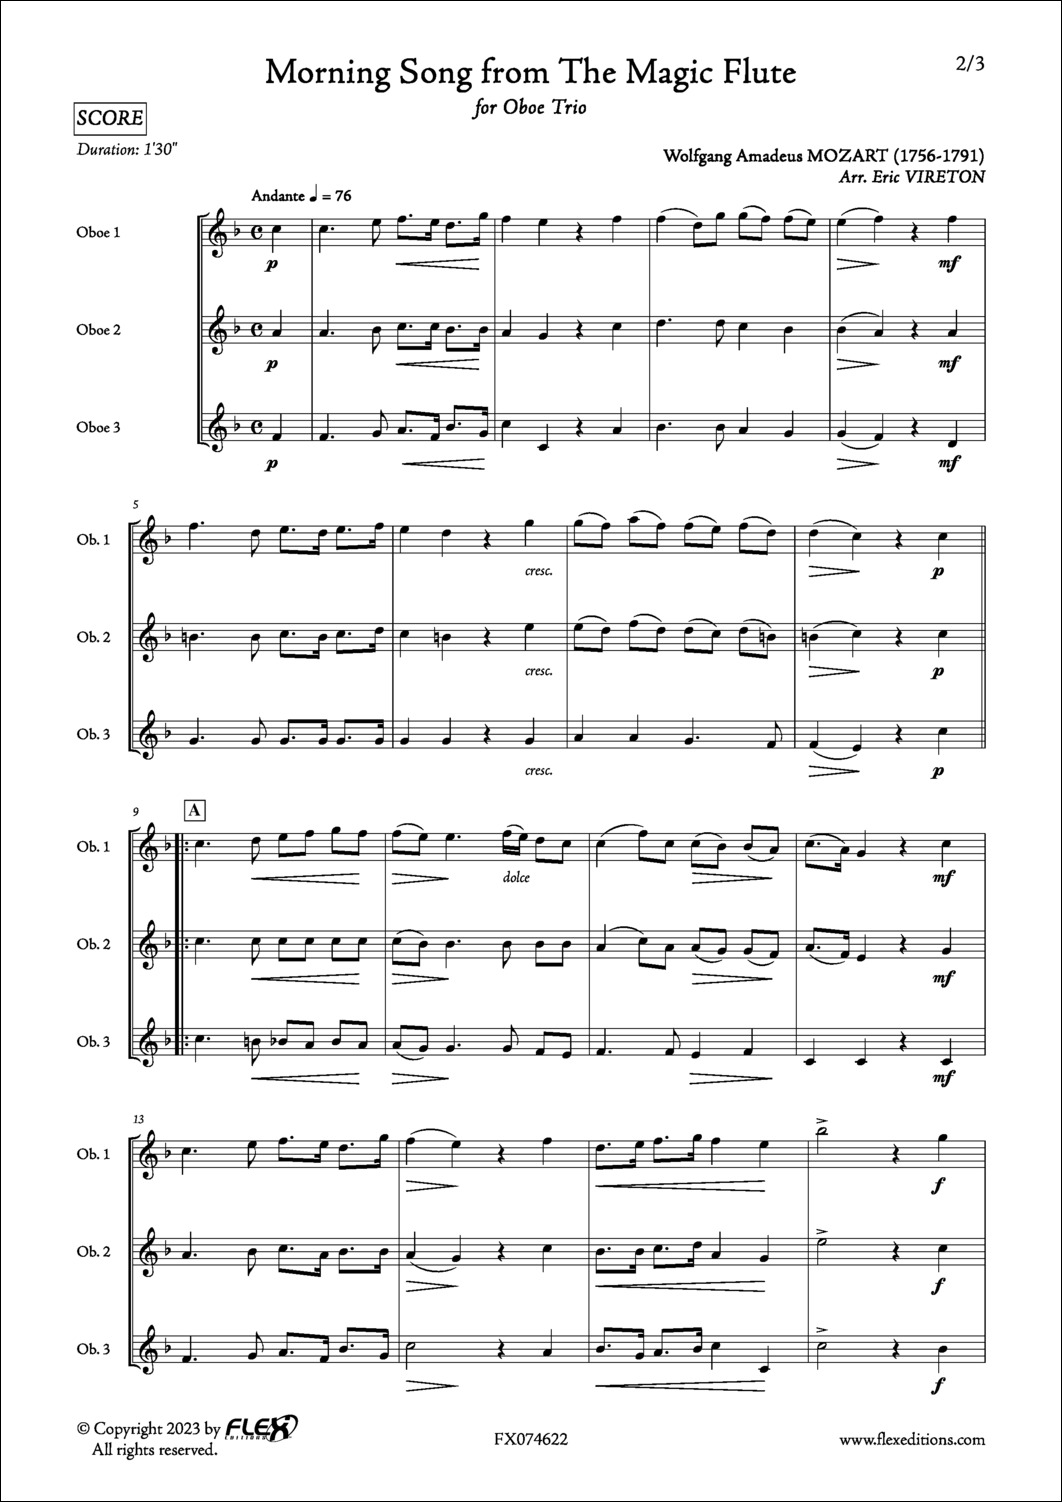 W. A. MOZART - E. VIRETON - Morning Song from The Magic Flute - Sheet ...